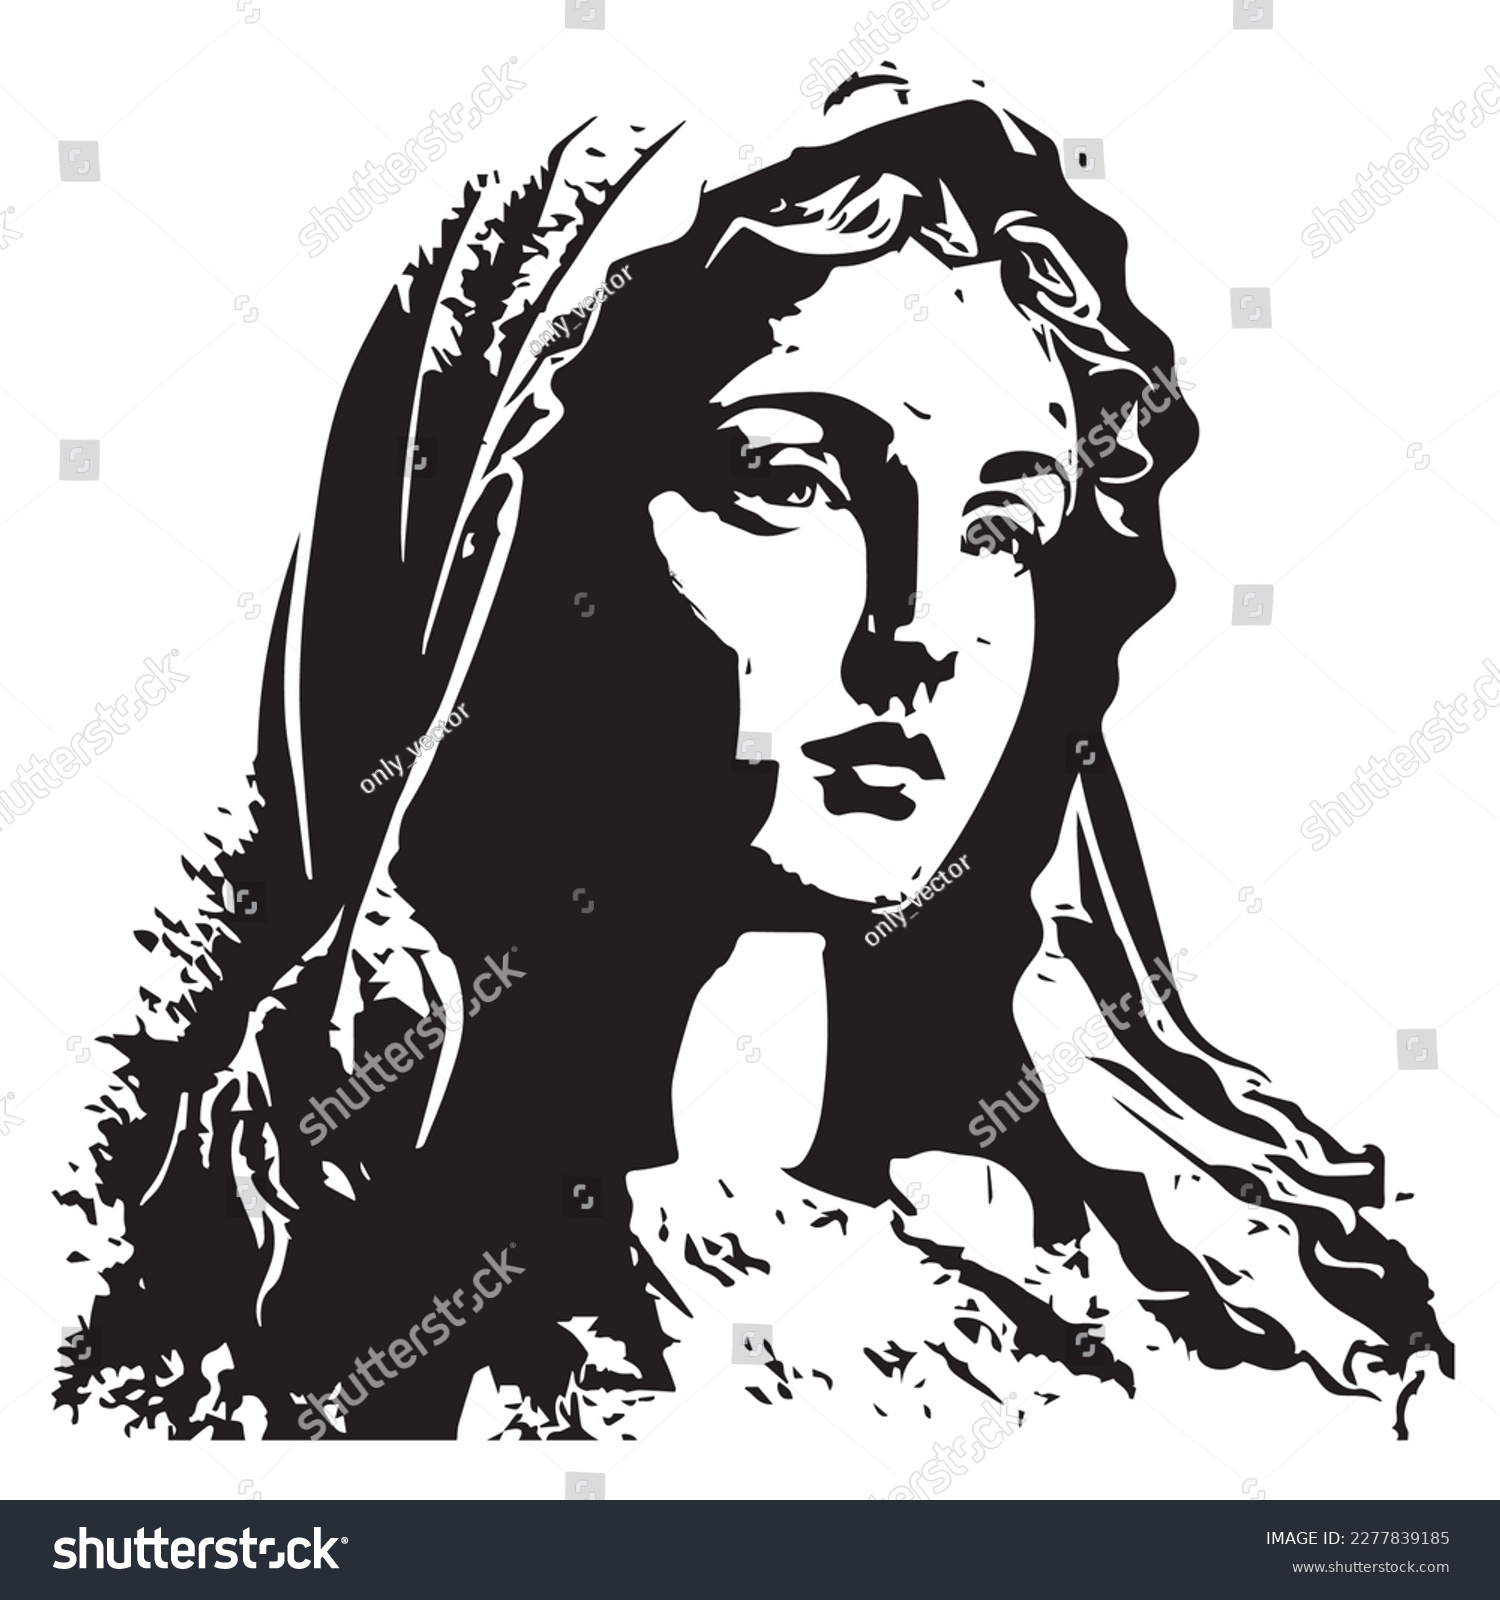 Virgin Mary, Our Lady. Hand drawn vector - Royalty Free Stock Vector ...